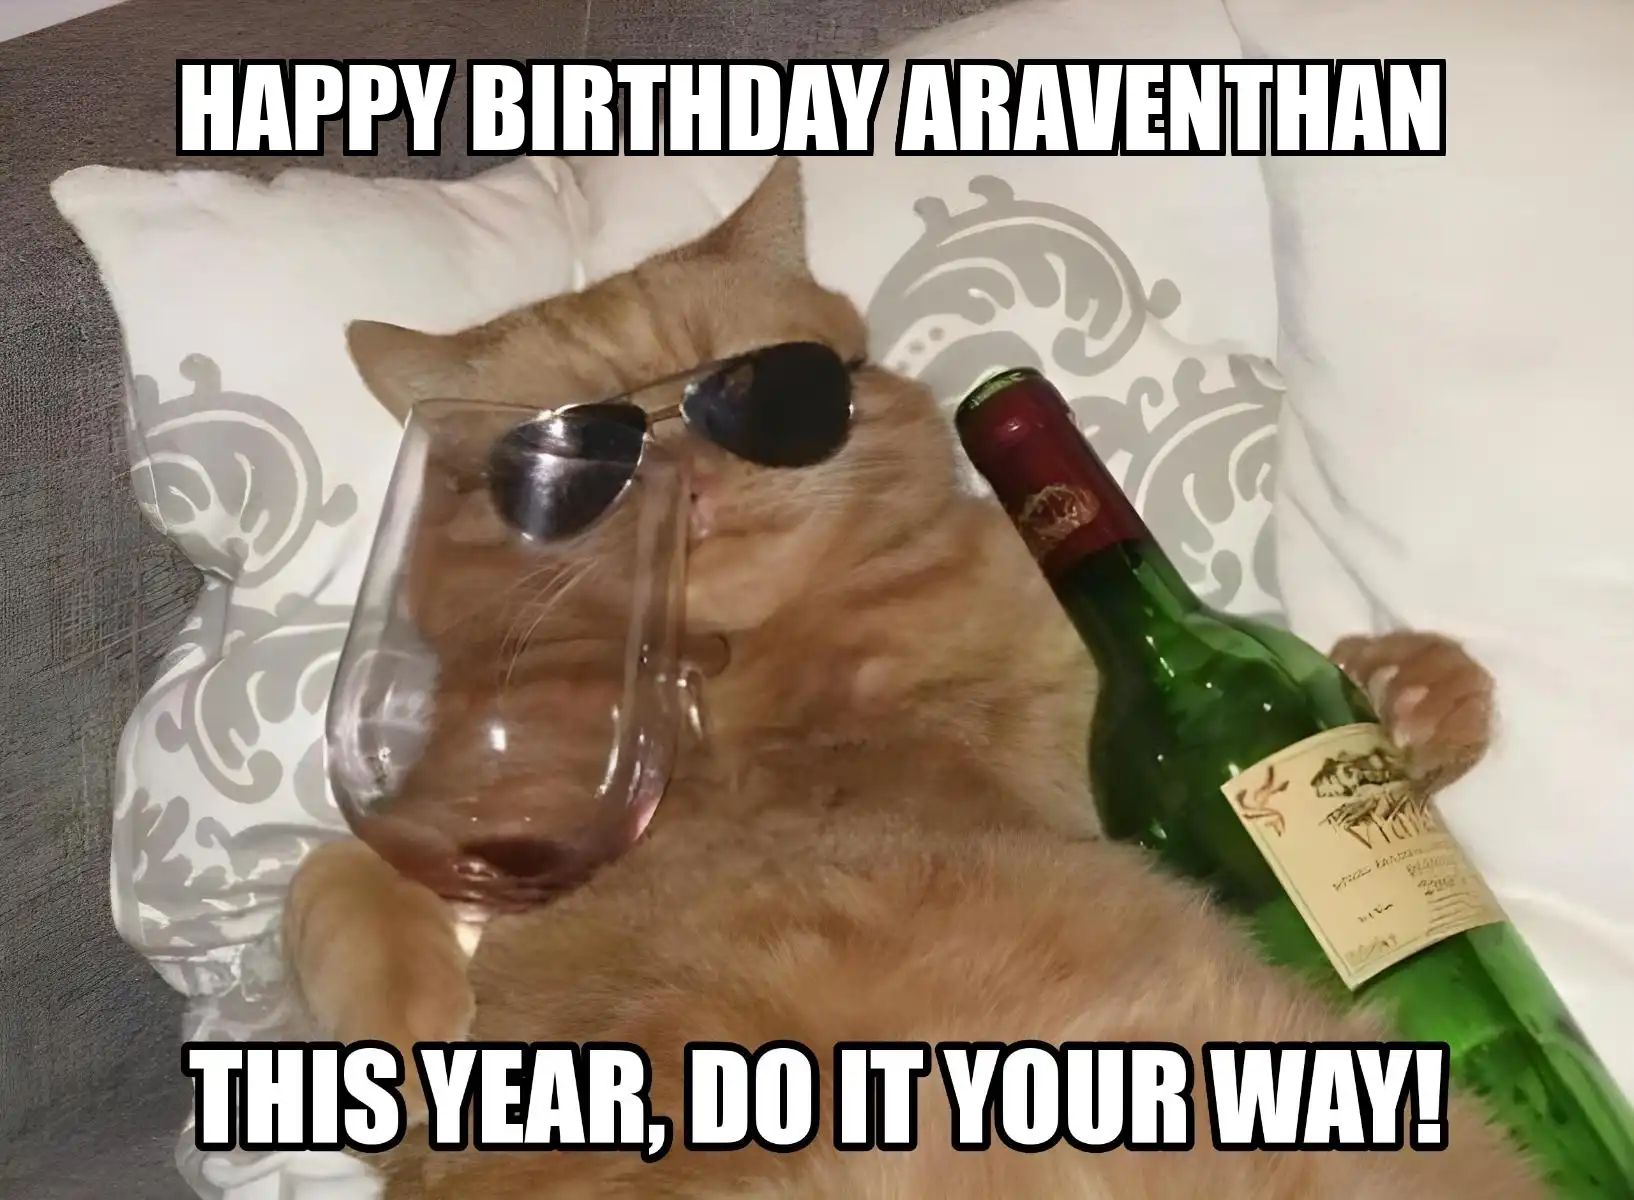 Happy Birthday Araventhan This Year Do It Your Way Meme